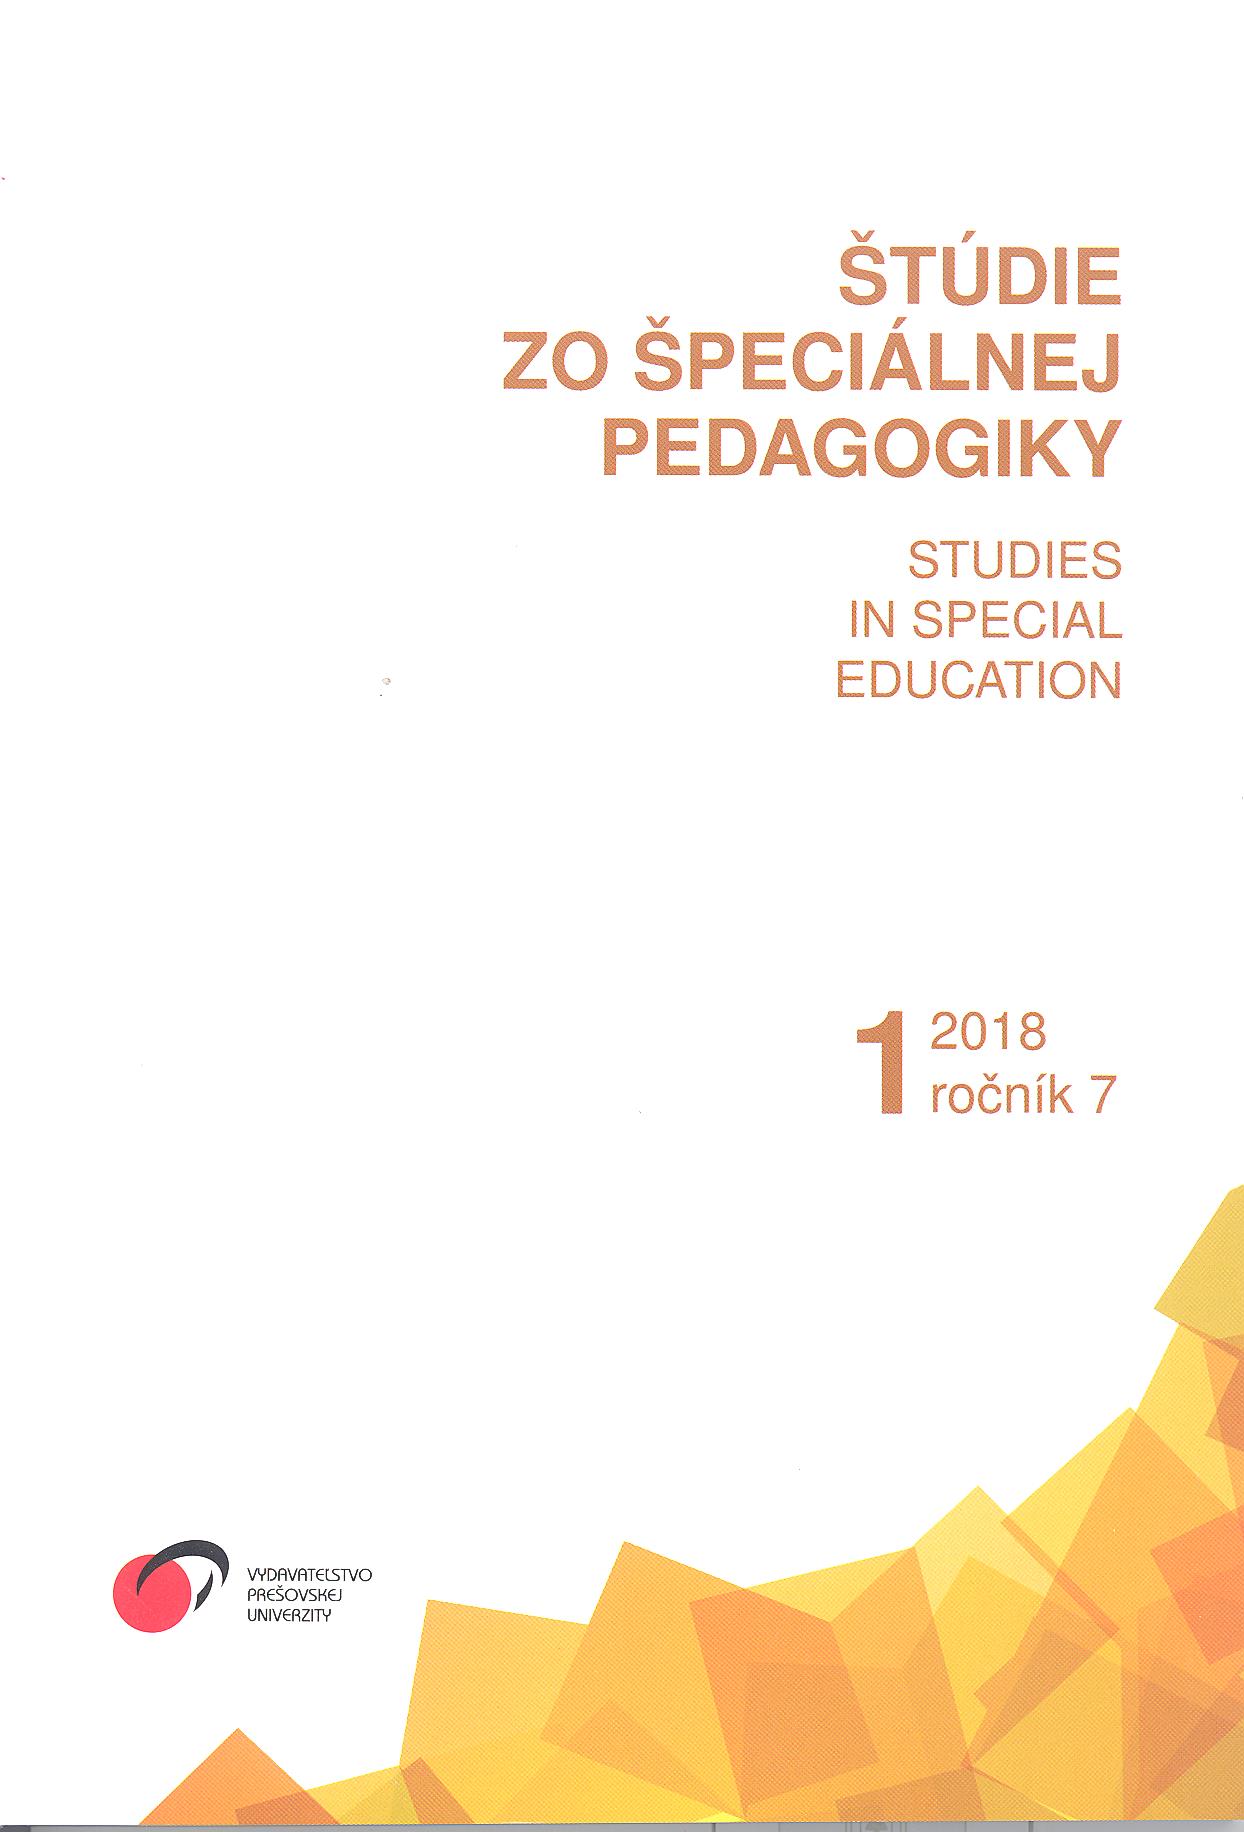 Personal and Professional Portrait of Augustín Bartoš
in the Context of Special Education Cover Image